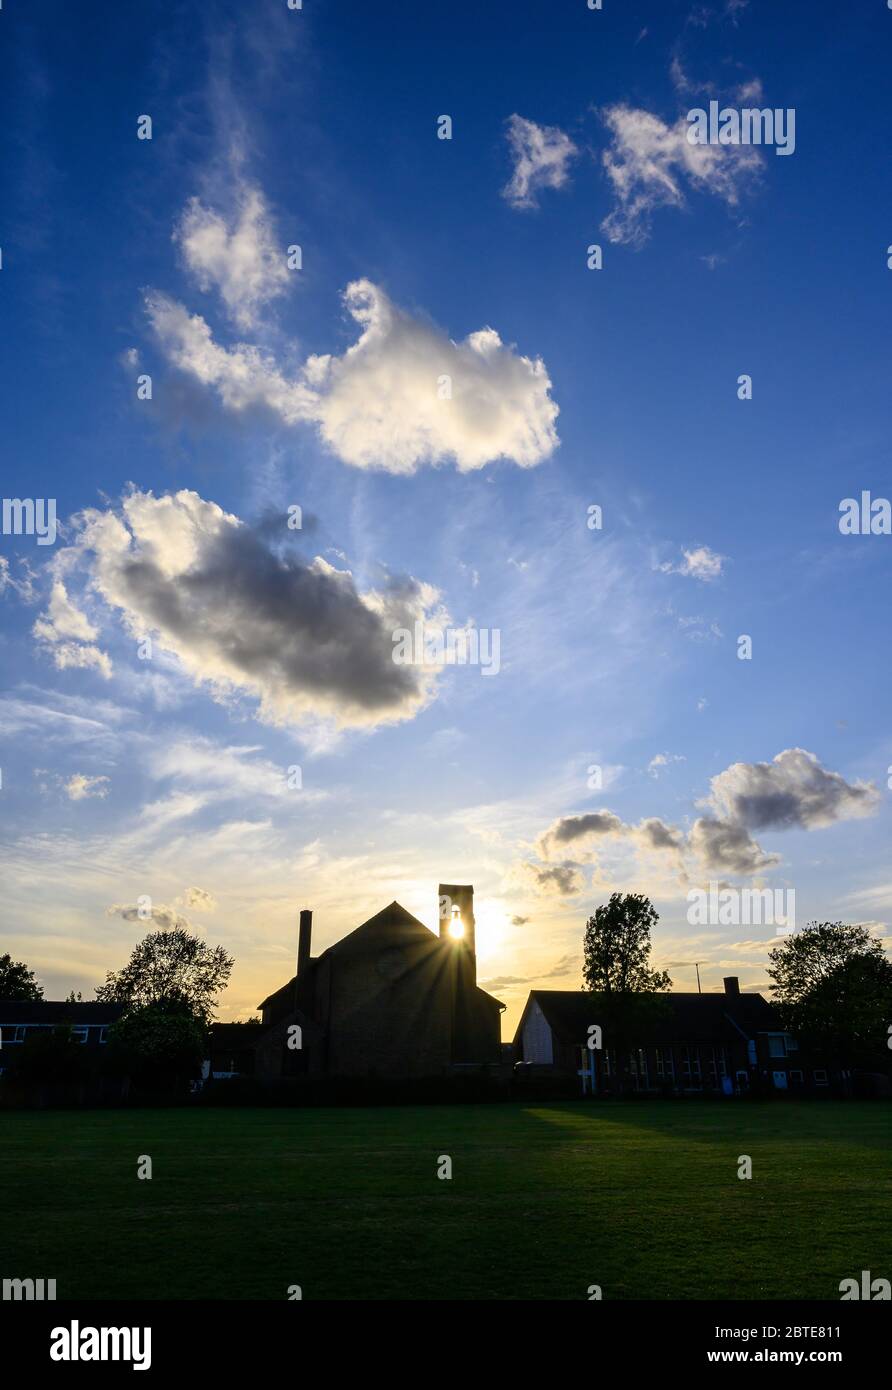 Dramatic clouds at sunset over St Johns Church in Beckenham, Kent, UK. The setting sun shines through the bell tower of the church with beautiful sky. Stock Photo